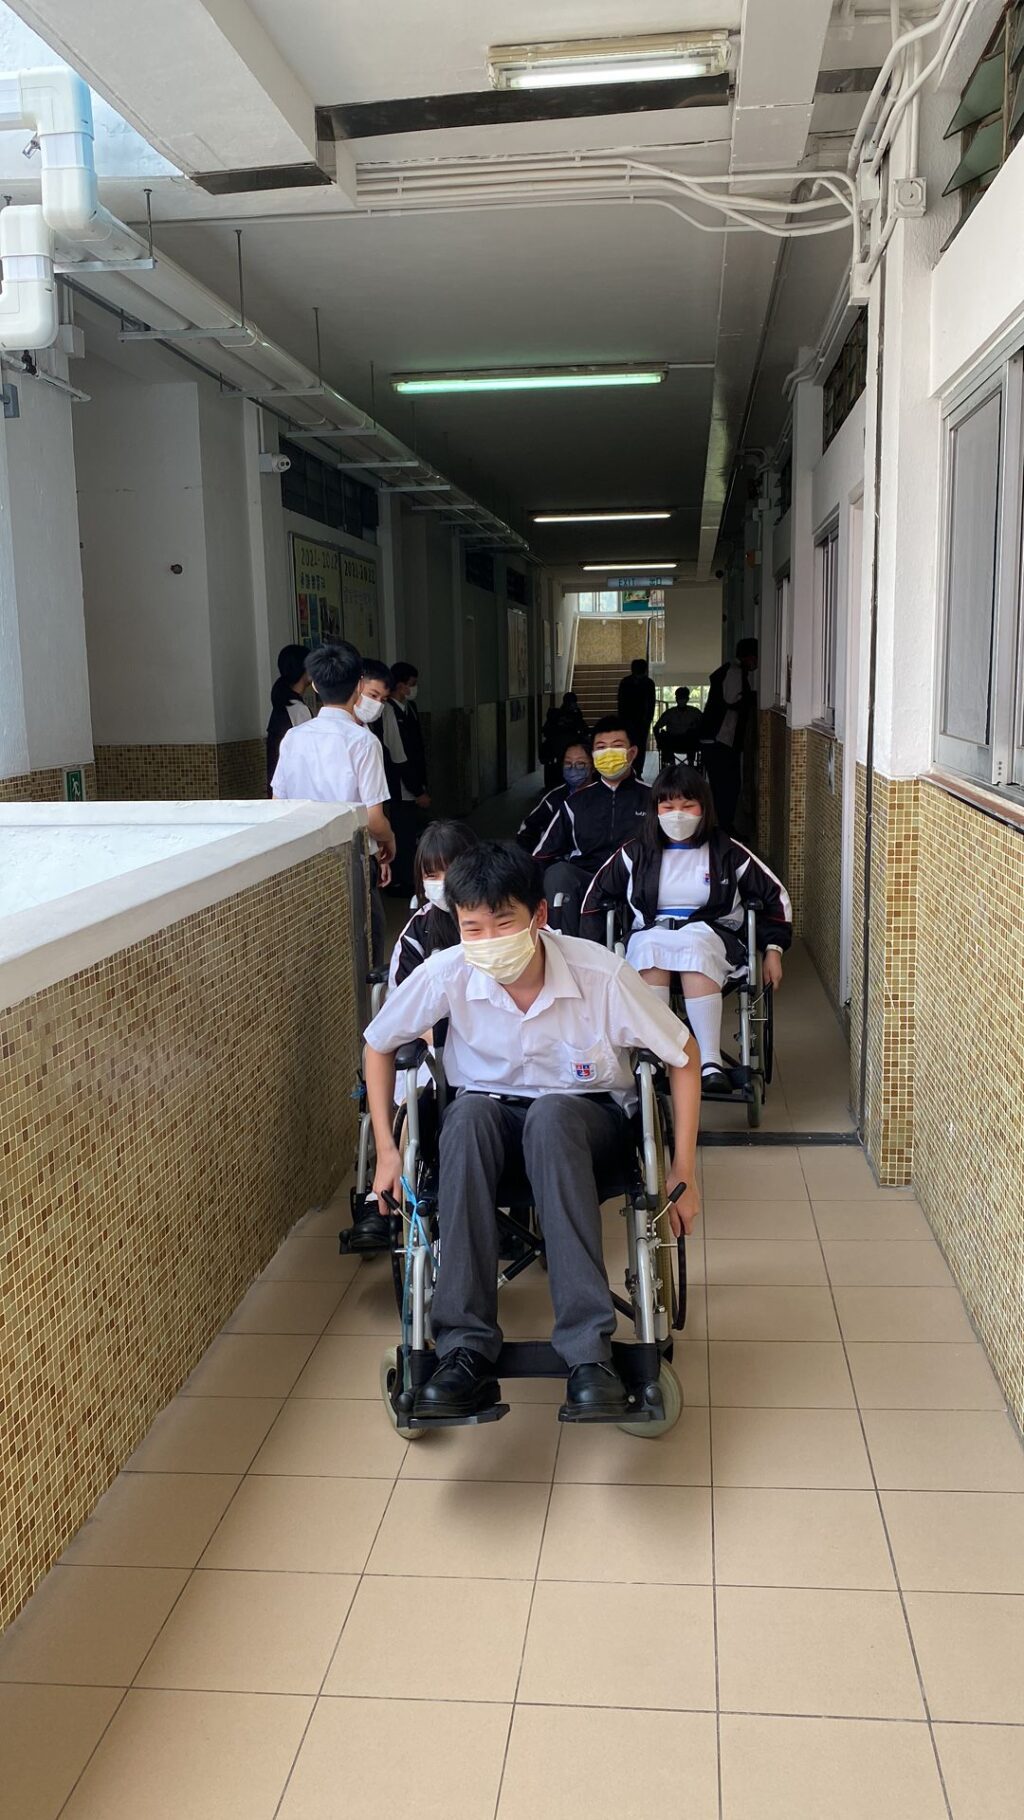 Students are learning to use a wheelchair.